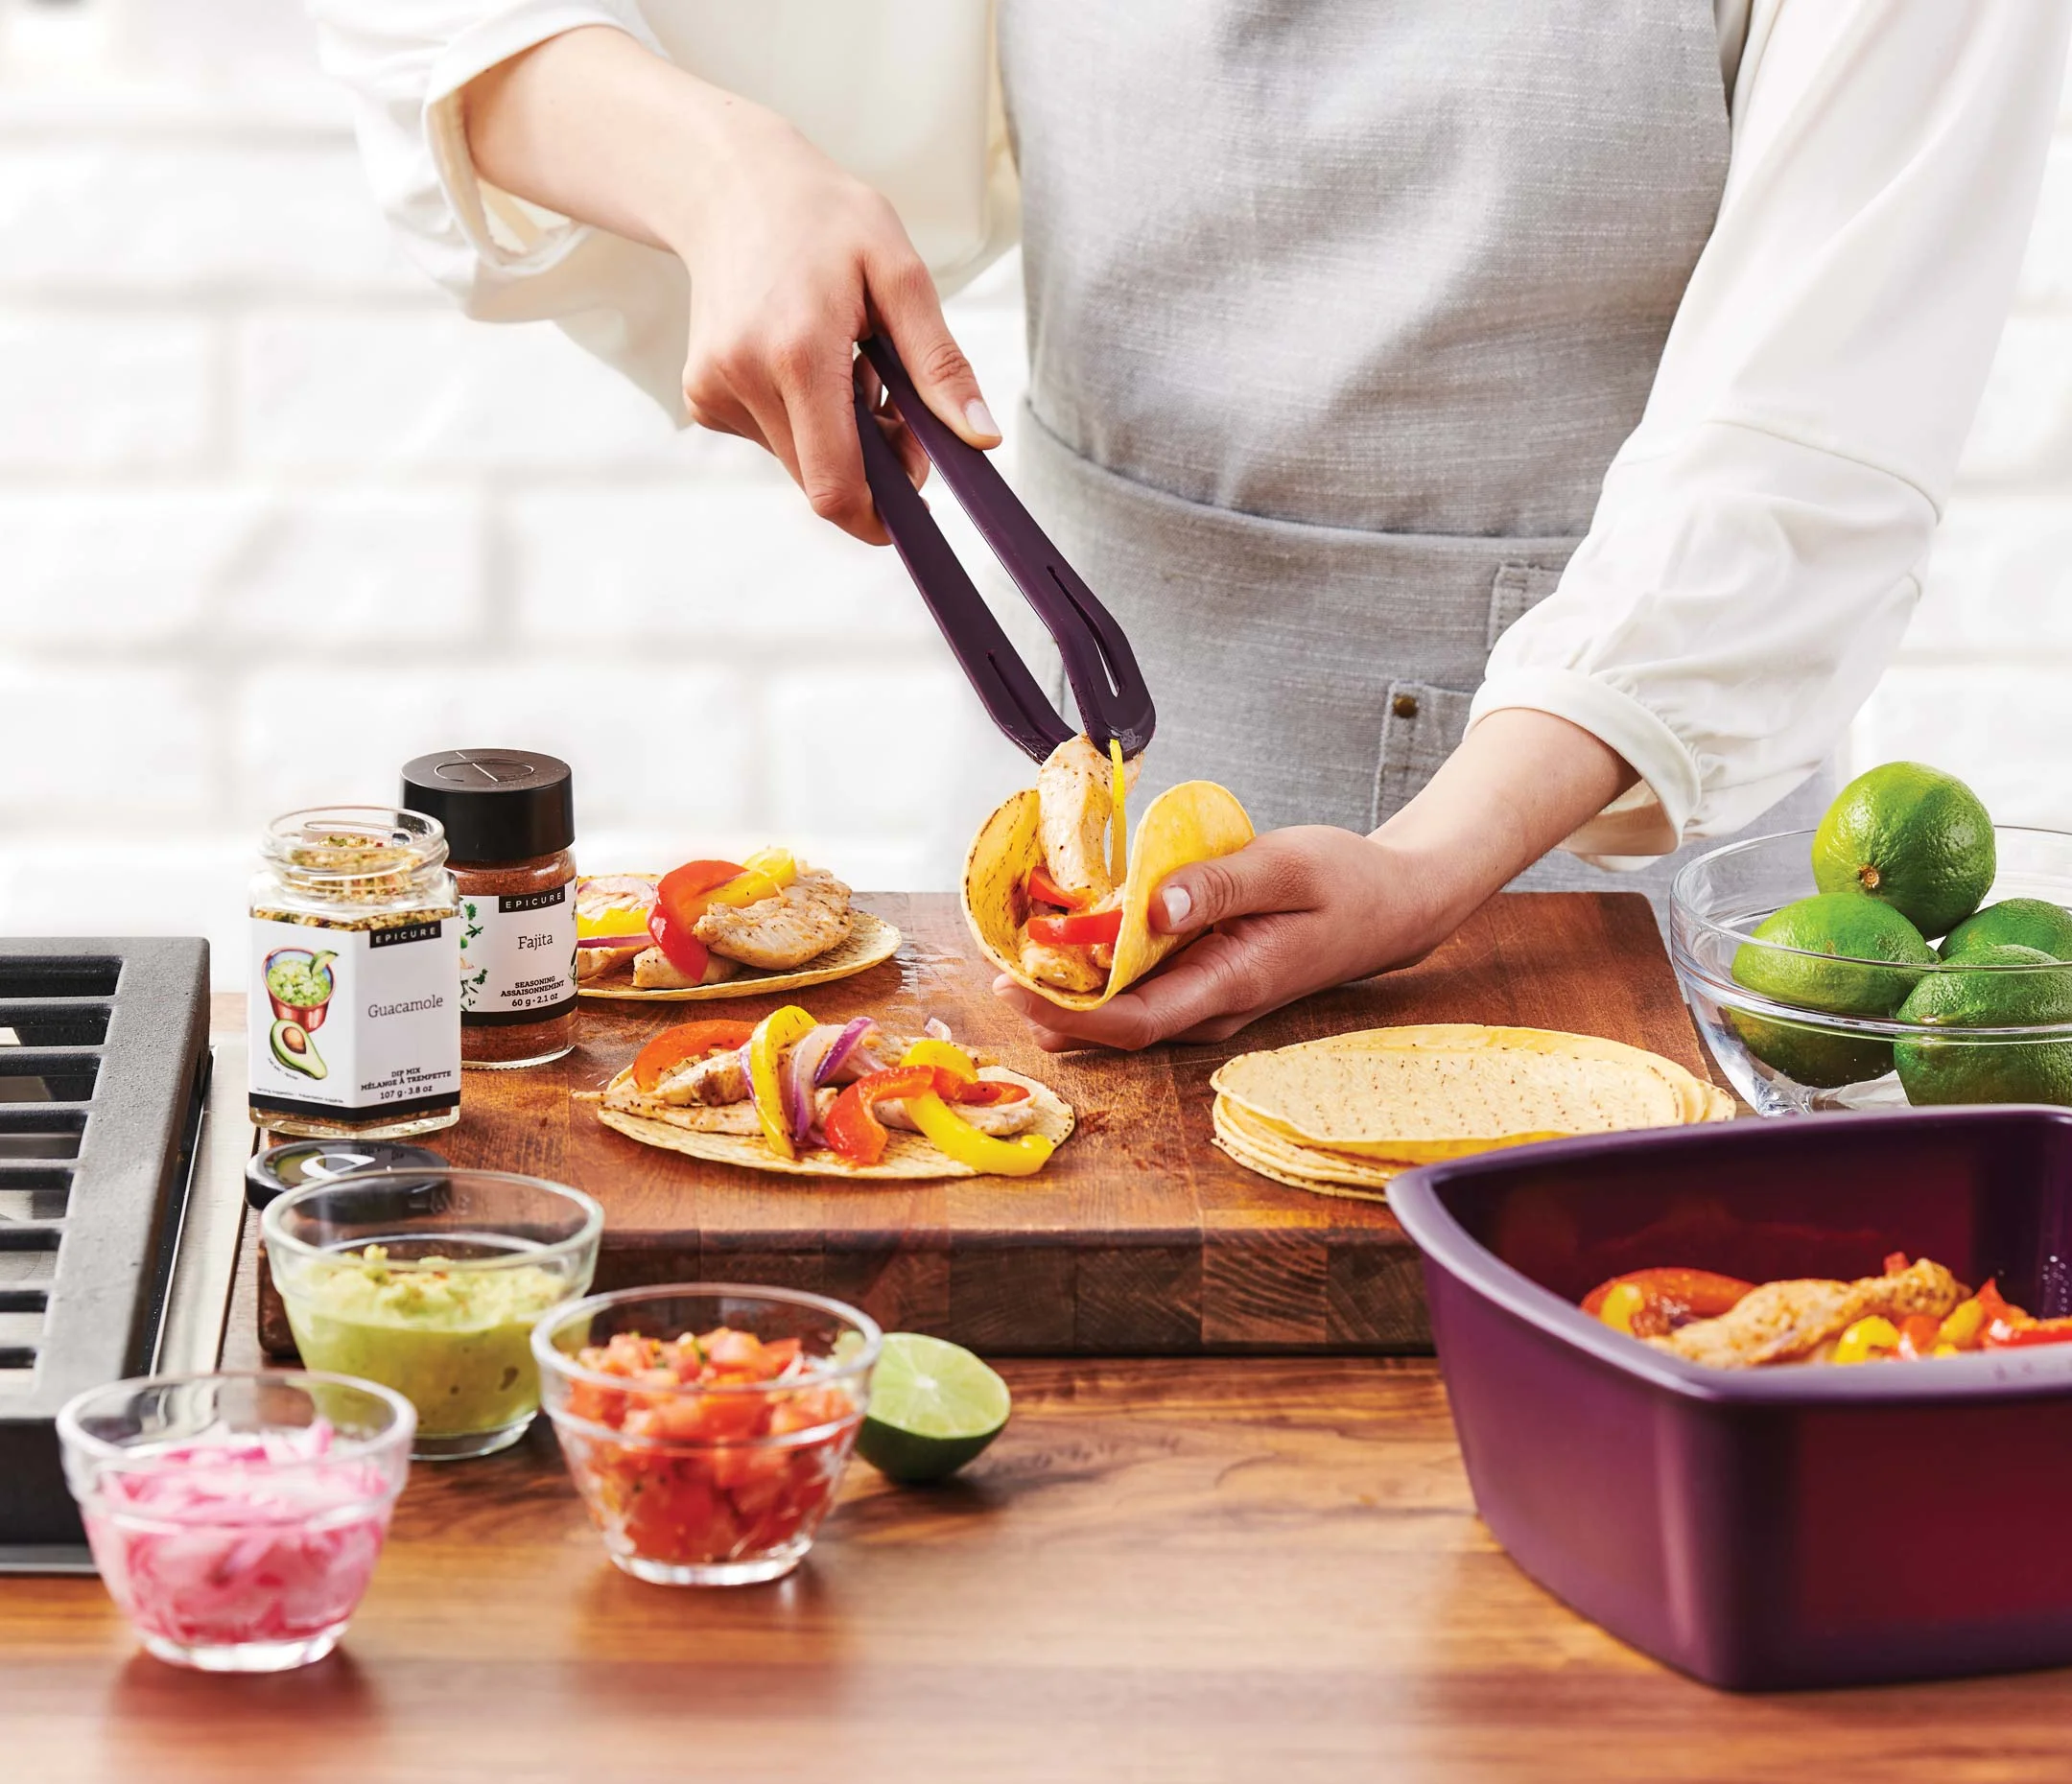 Taco Night Done Right with Prepara Taco Accessories, Food & Nutrition